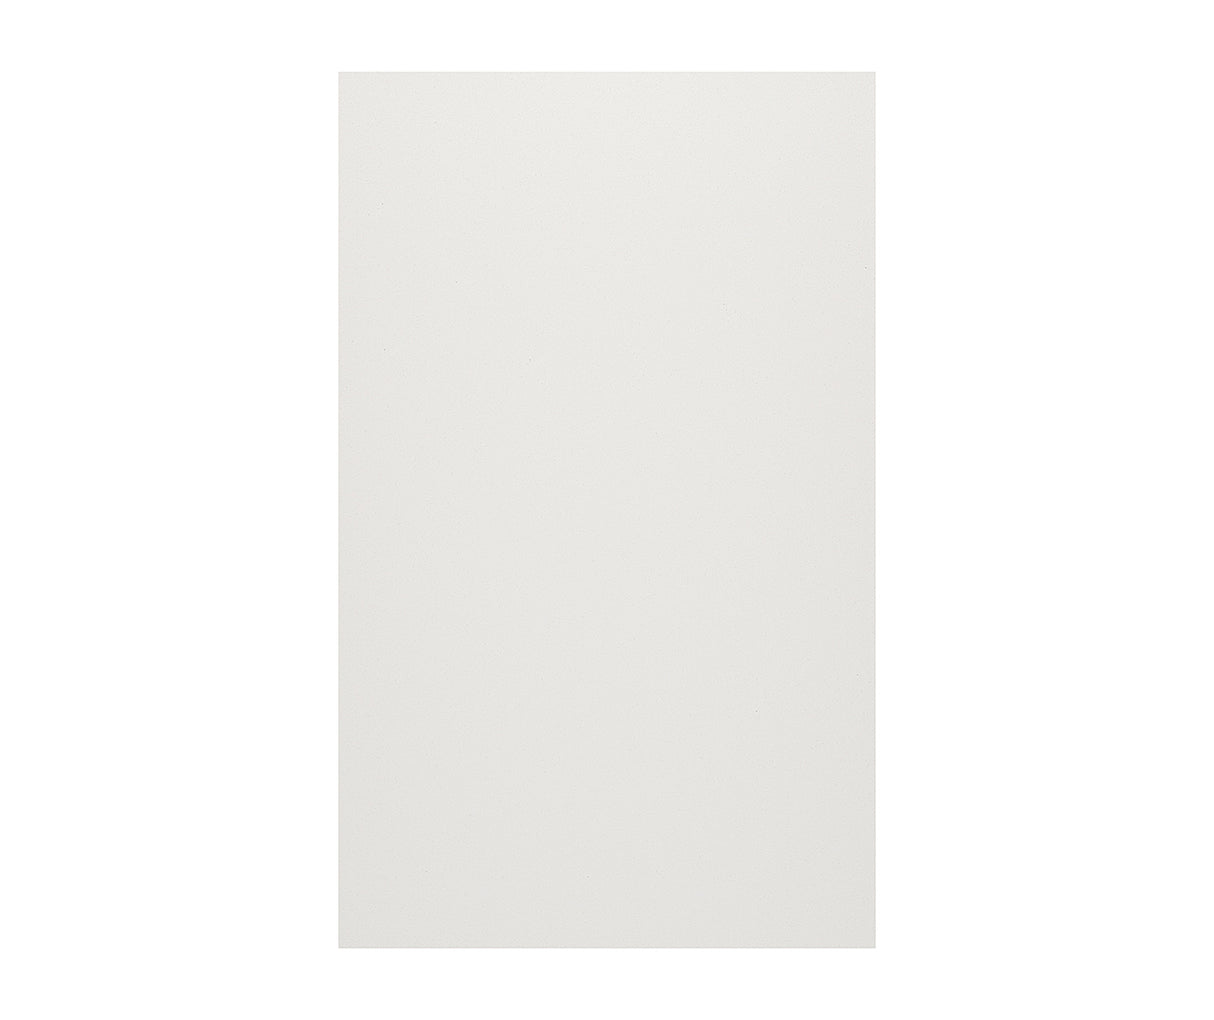 Swanstone SS-3696-1 36 x 96 Swanstone Smooth Glue up Bathtub and Shower Single Wall Panel in Birch SS0369601.226